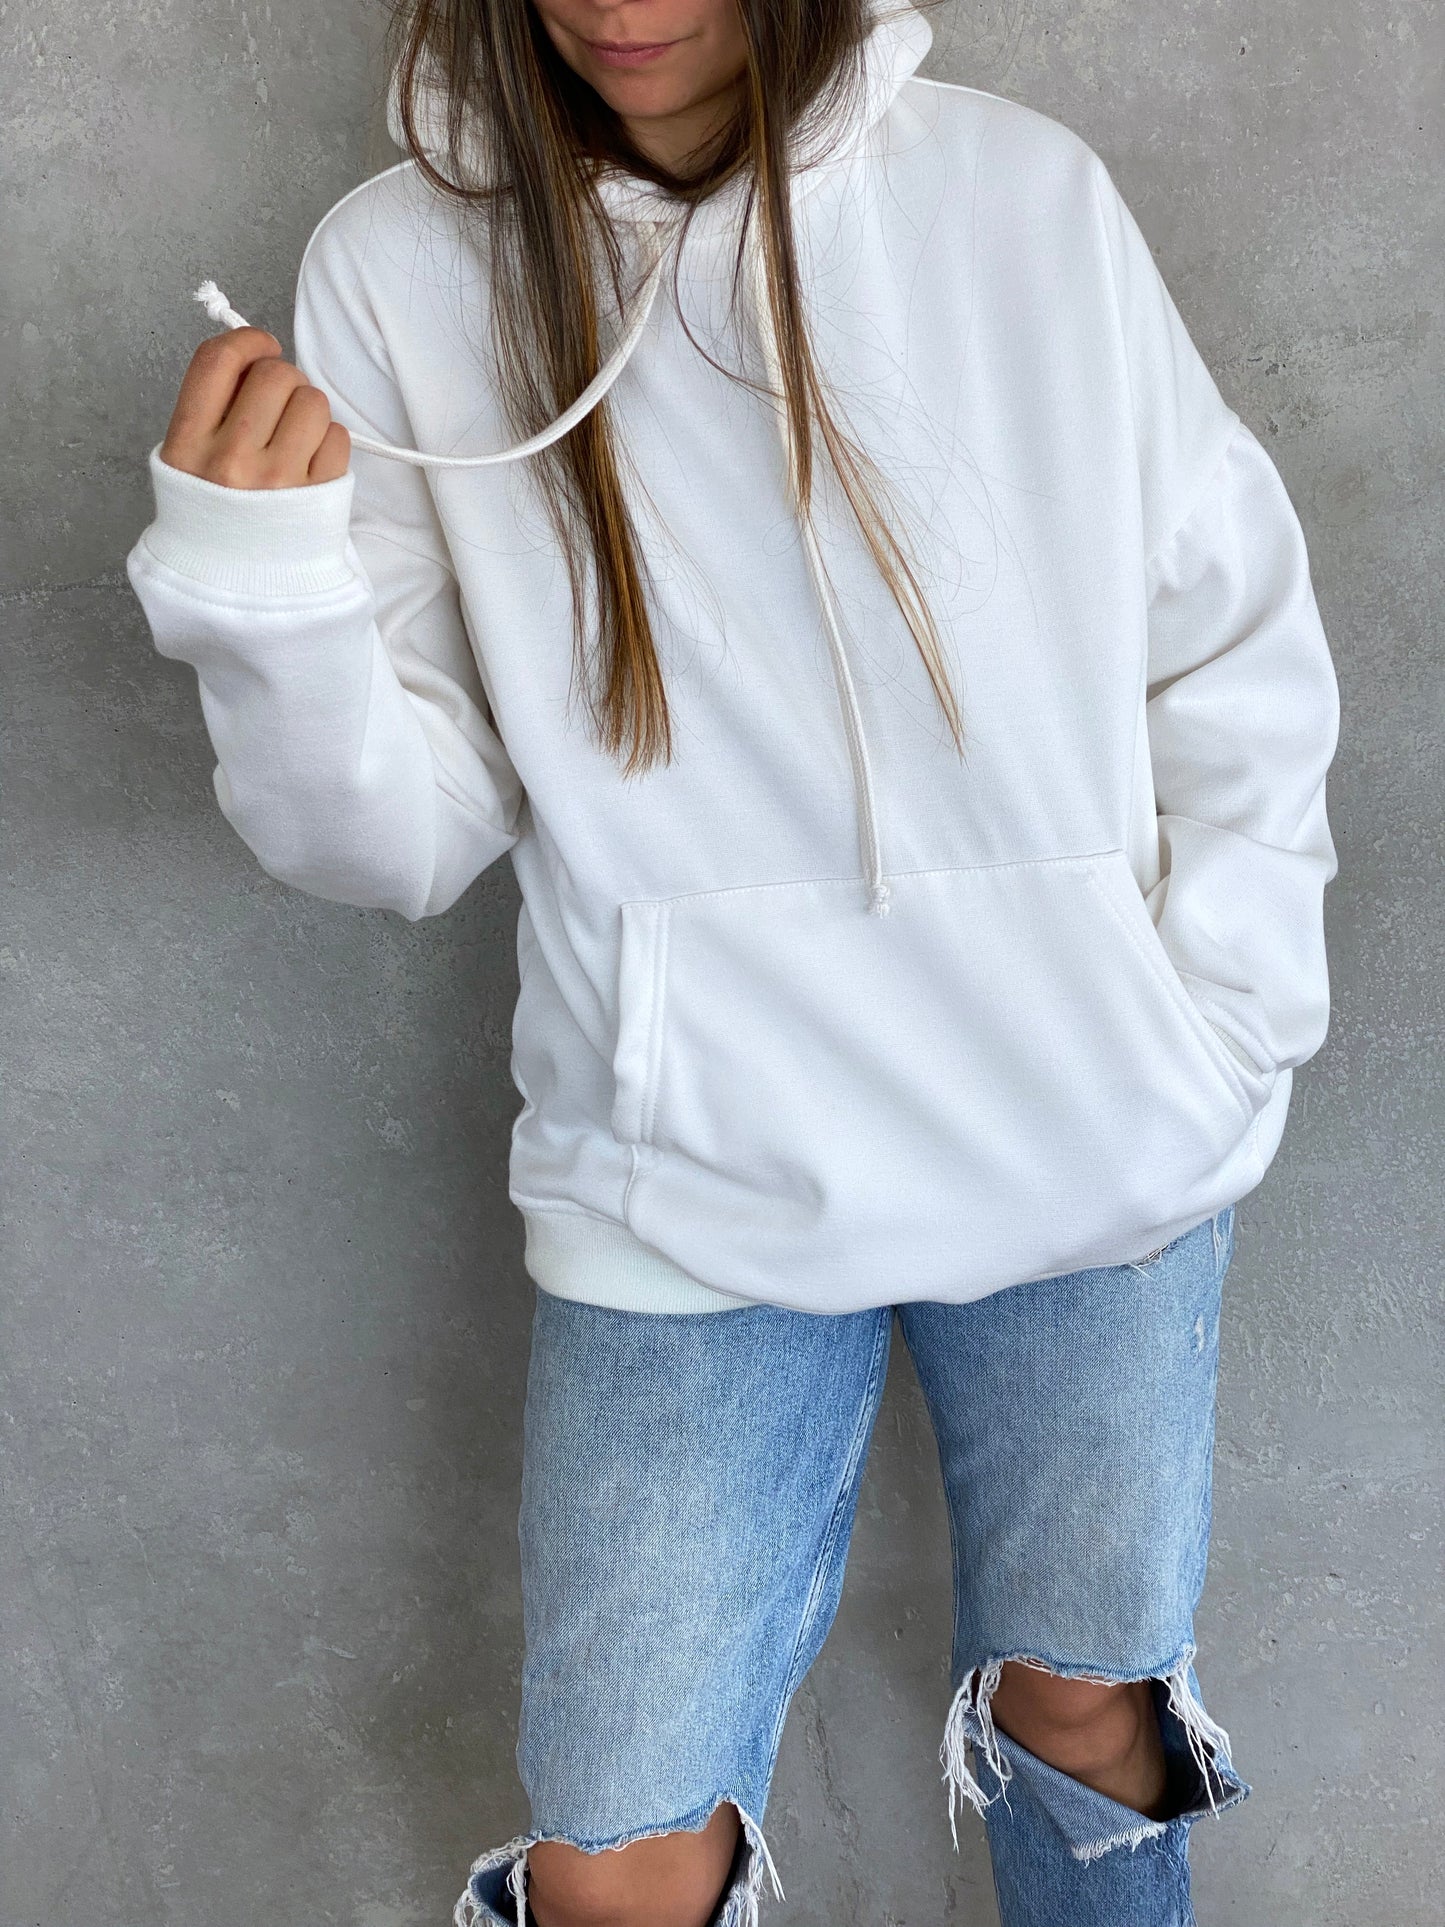 Perfecto Imperfecto Hoodie Happiness #139 Talla S/M